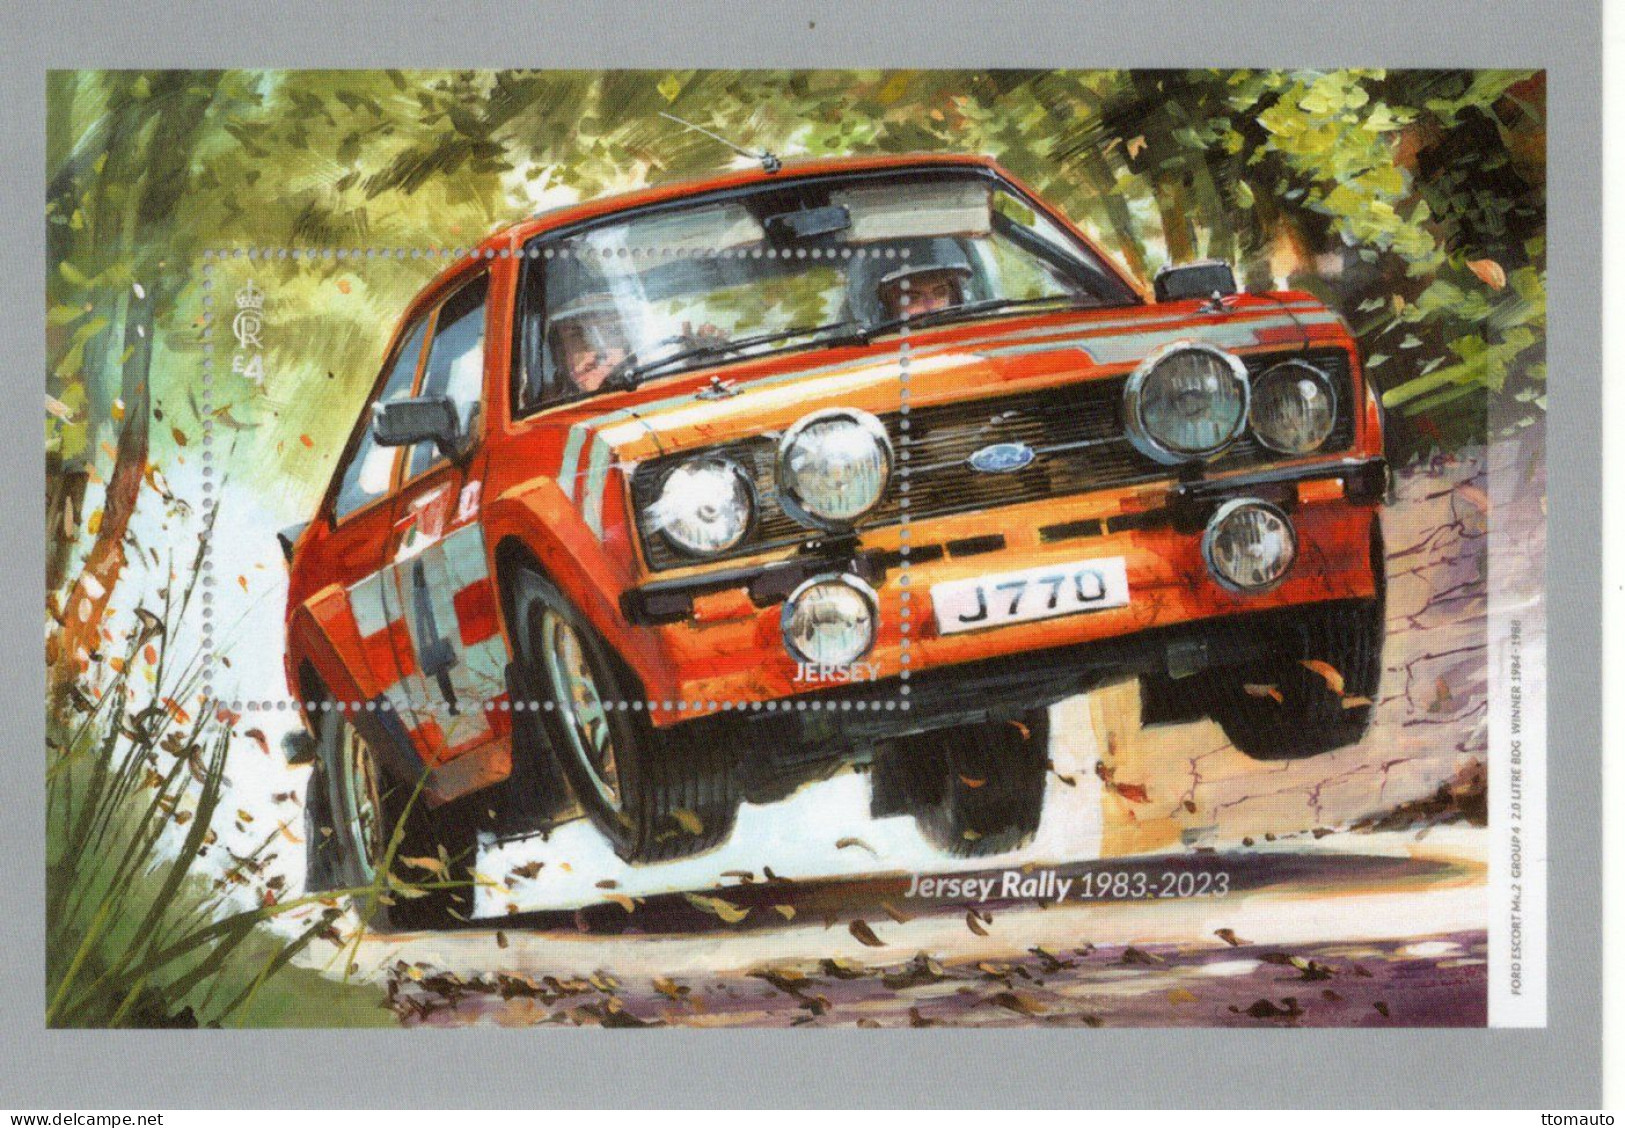 Ford Escort RS1800 -  40 Years Of Jersey Rally - Jersey PHQ Postcard - Rallye